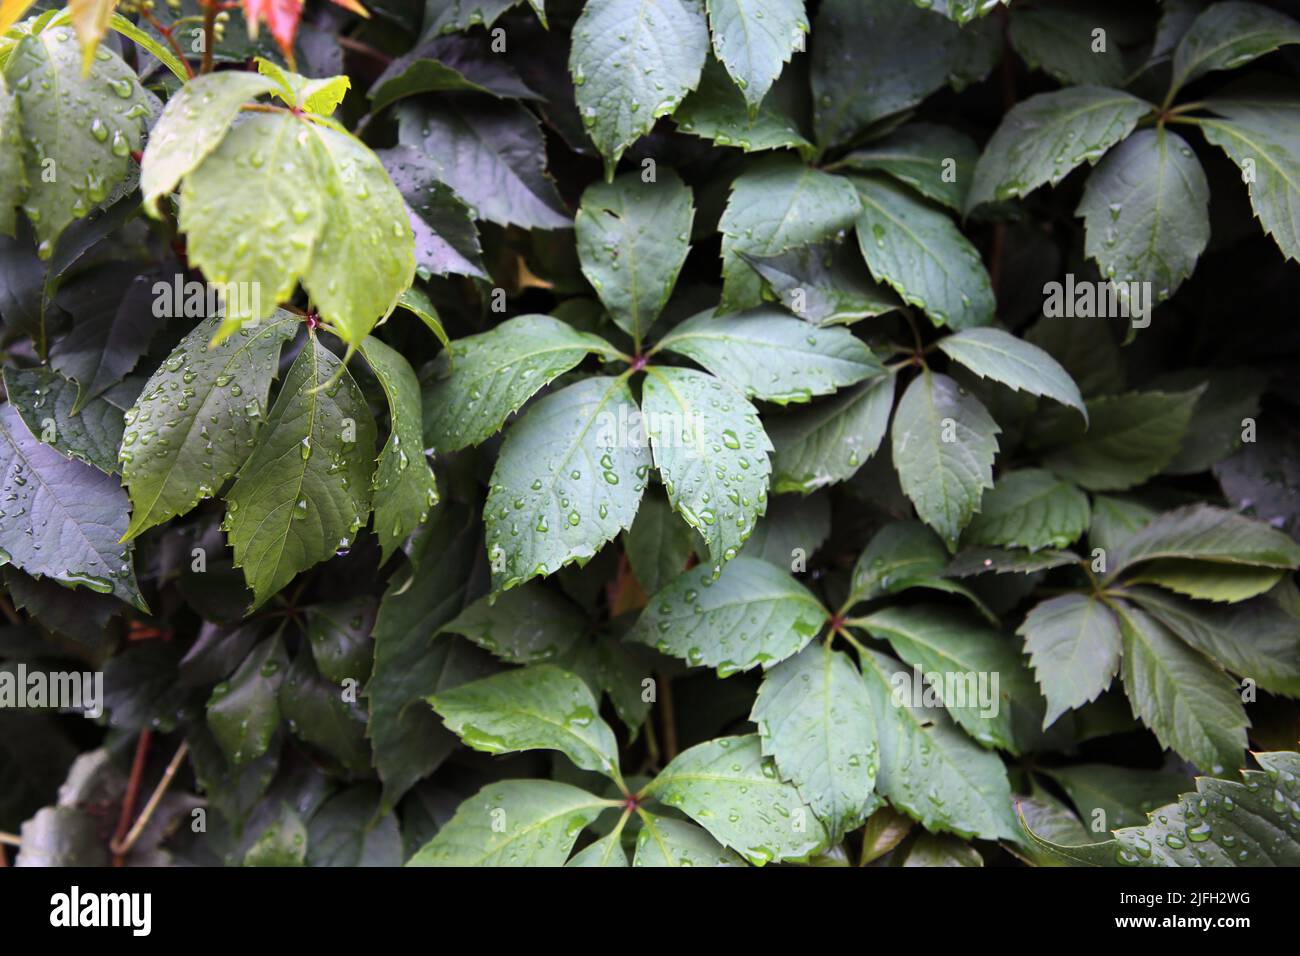 Green wall covered with a plant with a lot of green leaves. Photographed after a rain so the leaves have rain water drops on them. Beautiful natural. Stock Photo